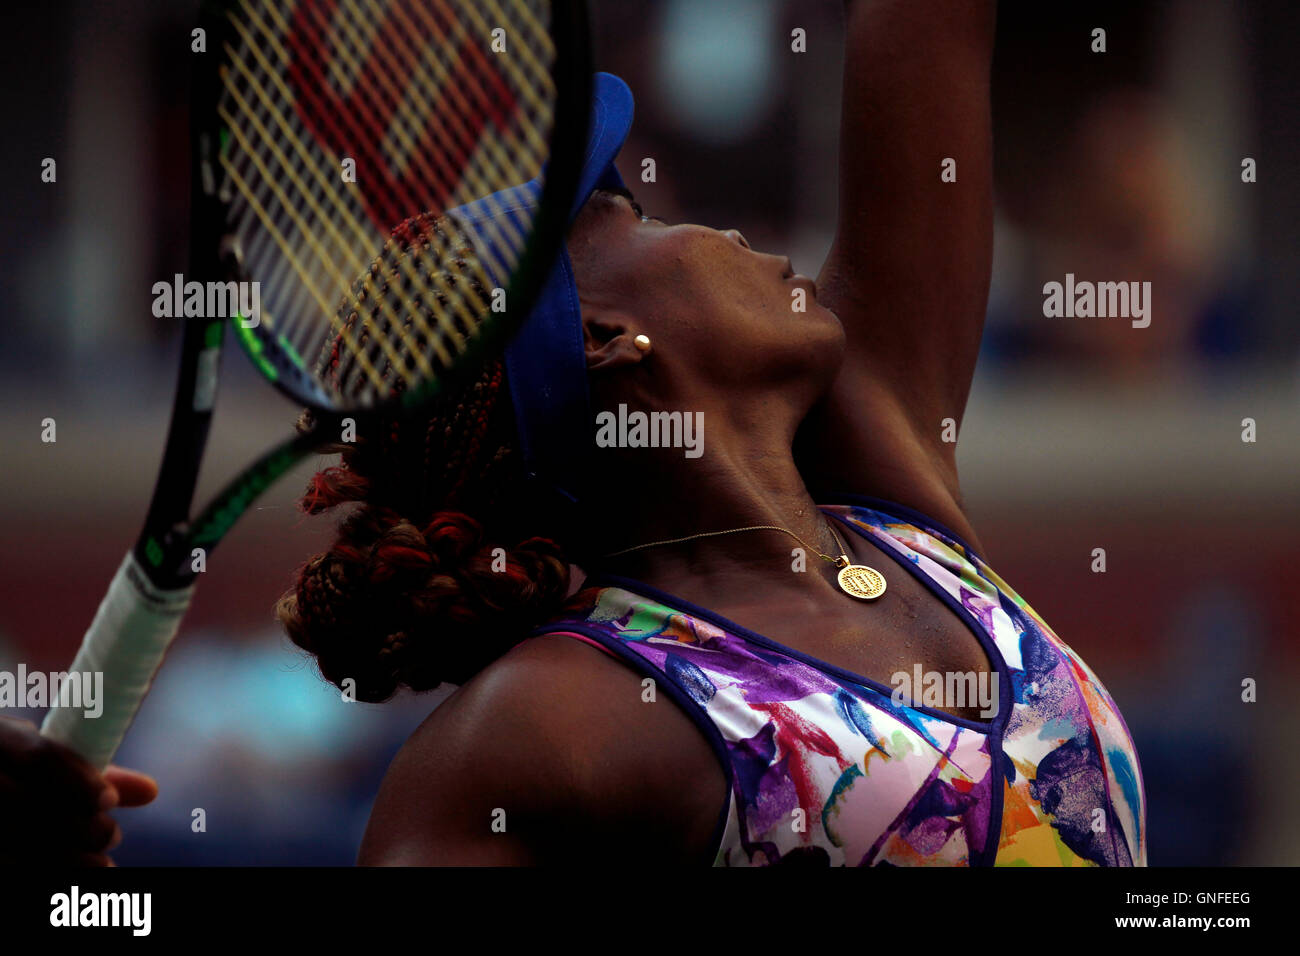 New York, USA. 30th Aug, 2016. Venus Williams serving during her first round match againstt Kateryna Kozlova of Ukraine at the United States Open Tennis Championships at Flushing Meadows, New York on Tuesday, August 30th.   Williams won the match in three sets. Credit:  Adam Stoltman/Alamy Live News Stock Photo